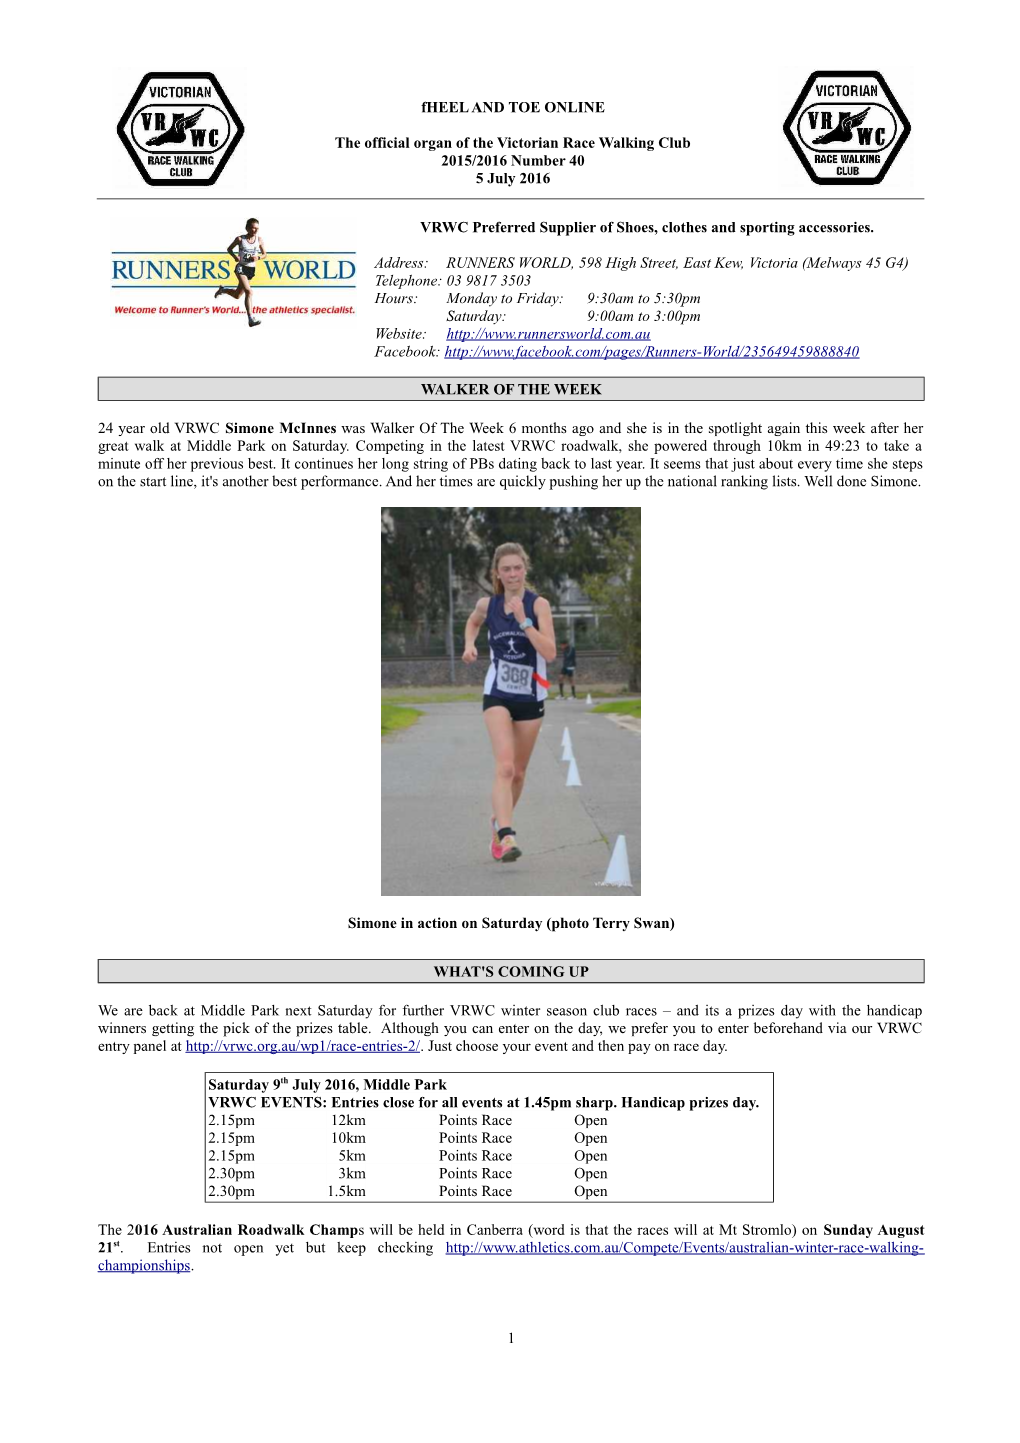 Fheel and TOE ONLINE the Official Organ of the Victorian Race Walking